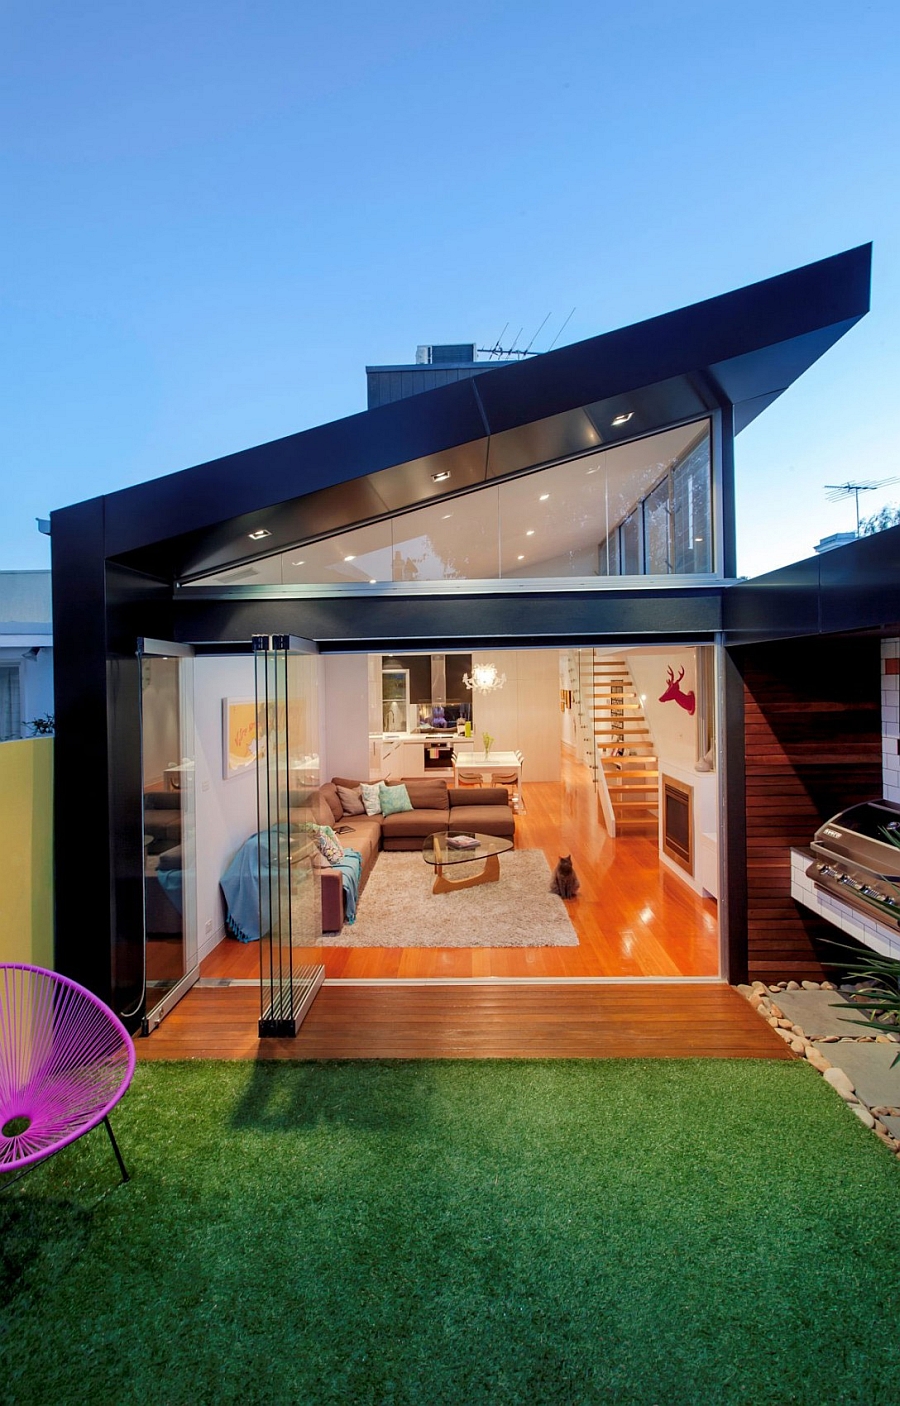 Traditional Victorian Home Transformed with a Glassy Modern Extension